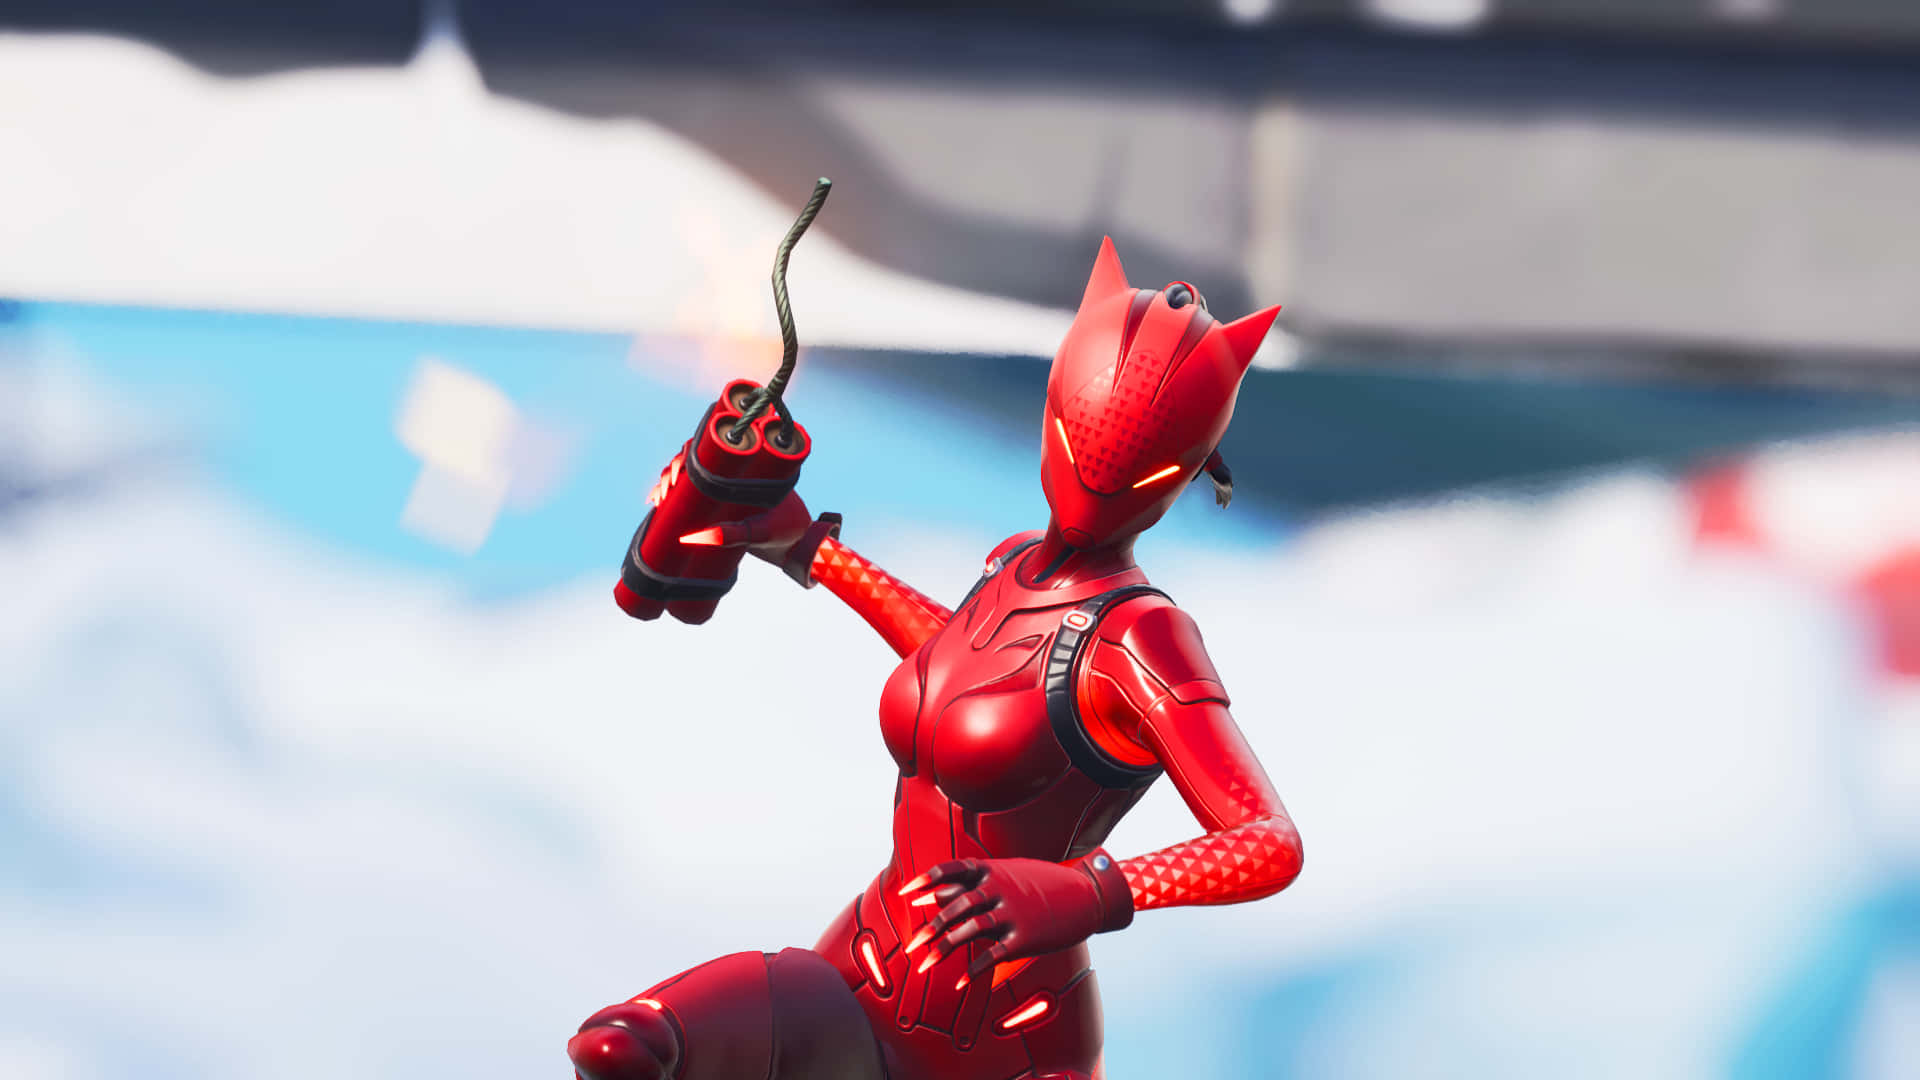 “Outfit up in the iconic Lynx skin from Fortnite” Wallpaper